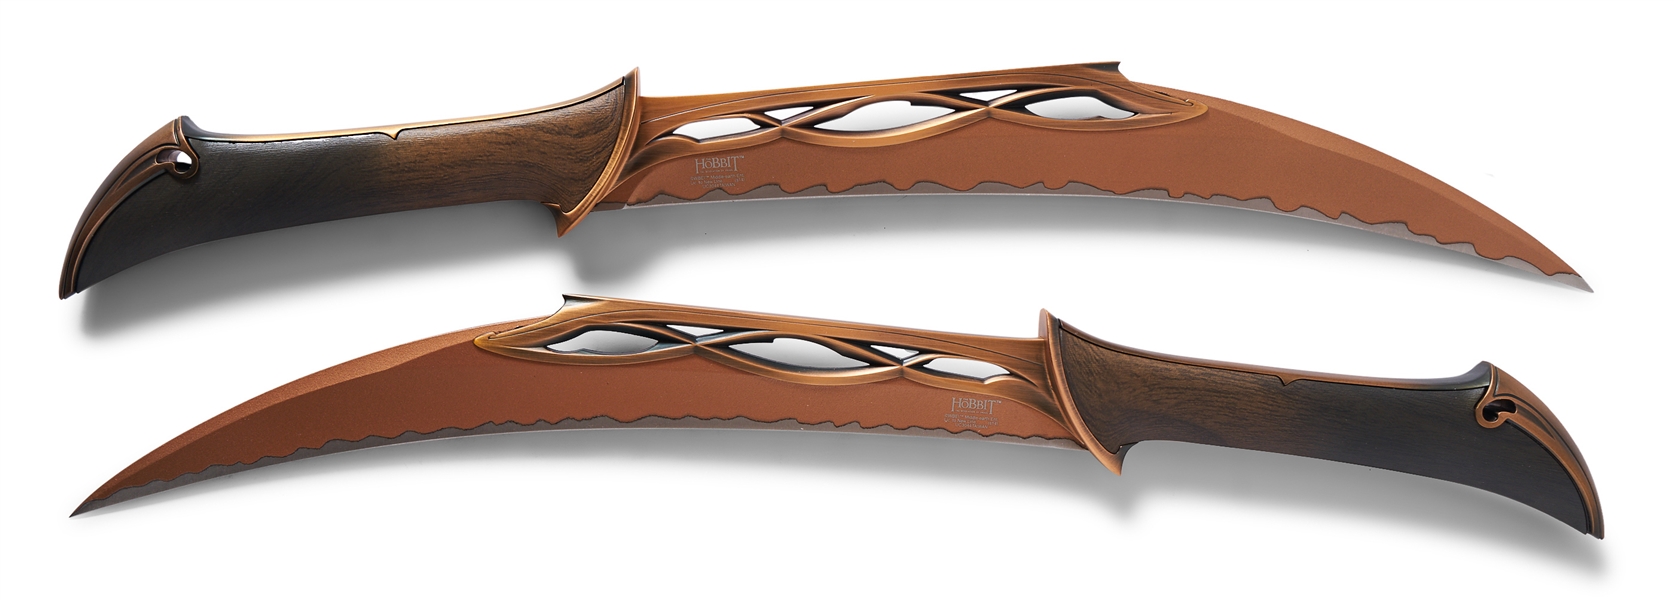 Evangeline Lilly Signed Set of Daggers, Tauriel's Weapons in ''The Hobbit'' Franchise